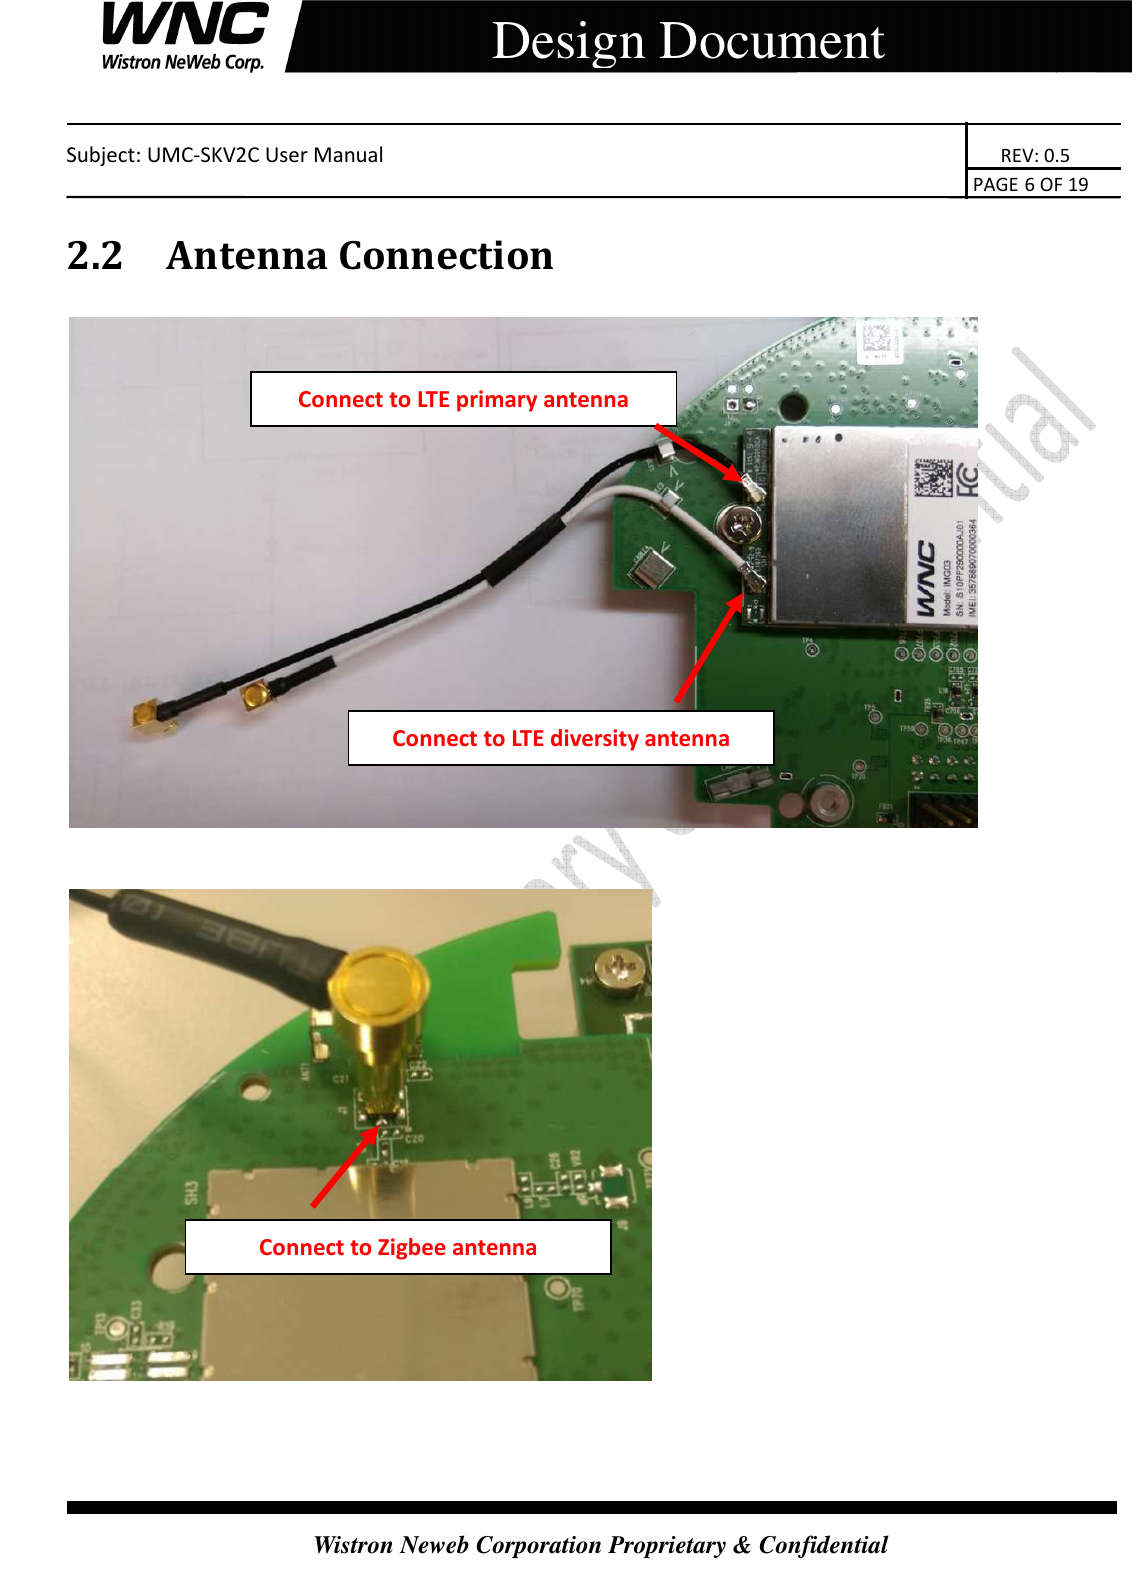    Subject: UMC-SKV2C User Manual                                                                       REV: 0.5                                                                                                                                                                               PAGE 6 OF 19  Wistron Neweb Corporation Proprietary &amp; Confidential     Design Document 2.2 Antenna Connection        Connect to LTE primary antenna Connect to LTE diversity antenna Connect to Zigbee antenna 